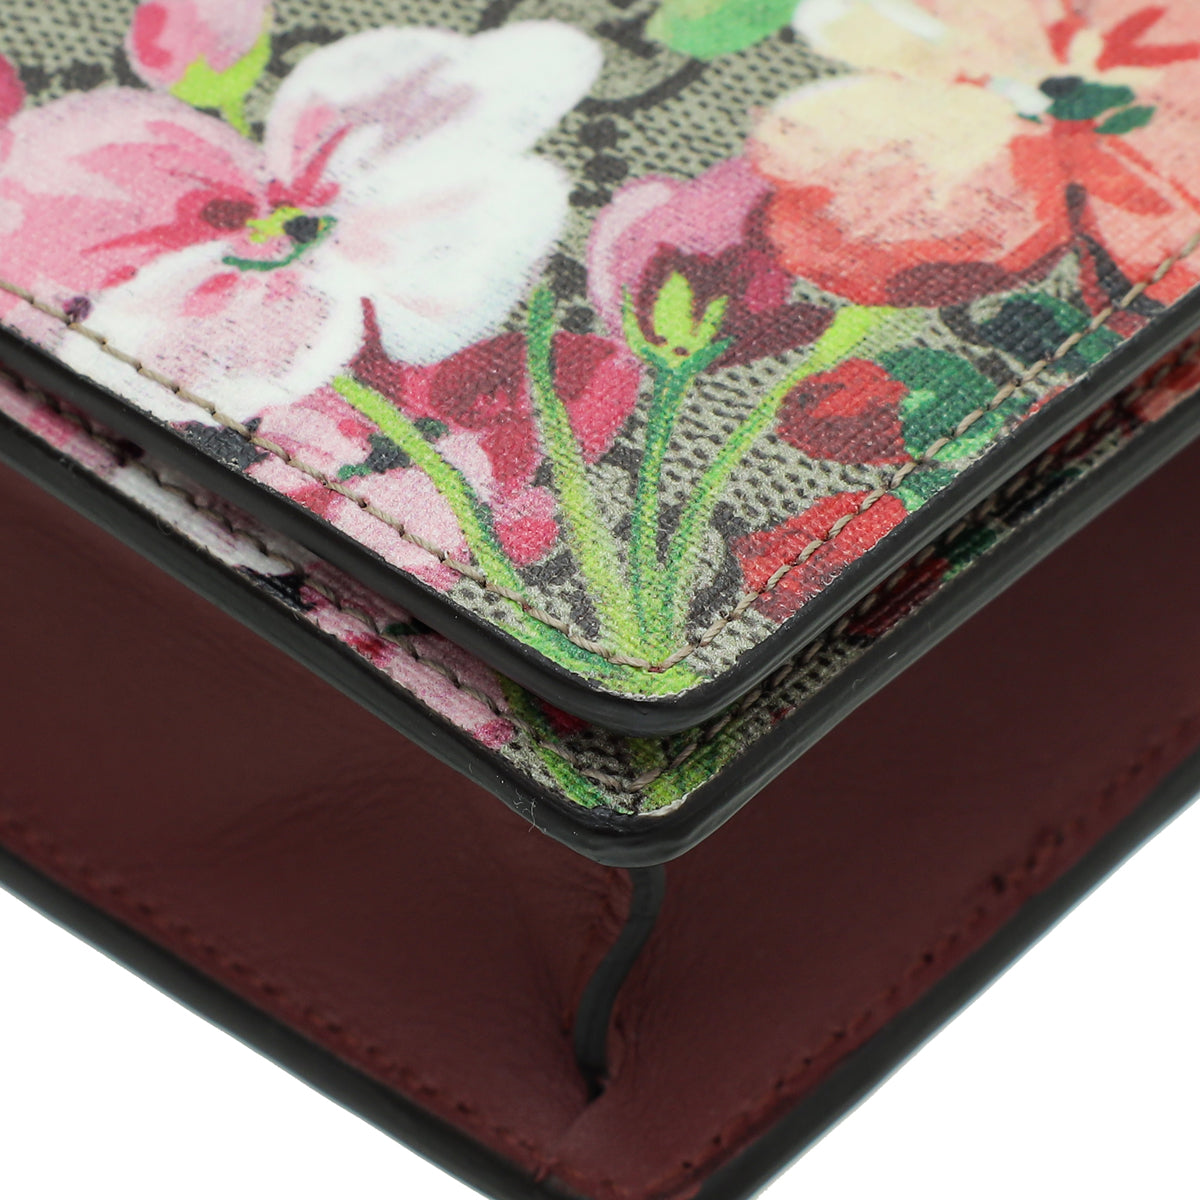 Gucci Bicolor Blooms Print Chain Wallet